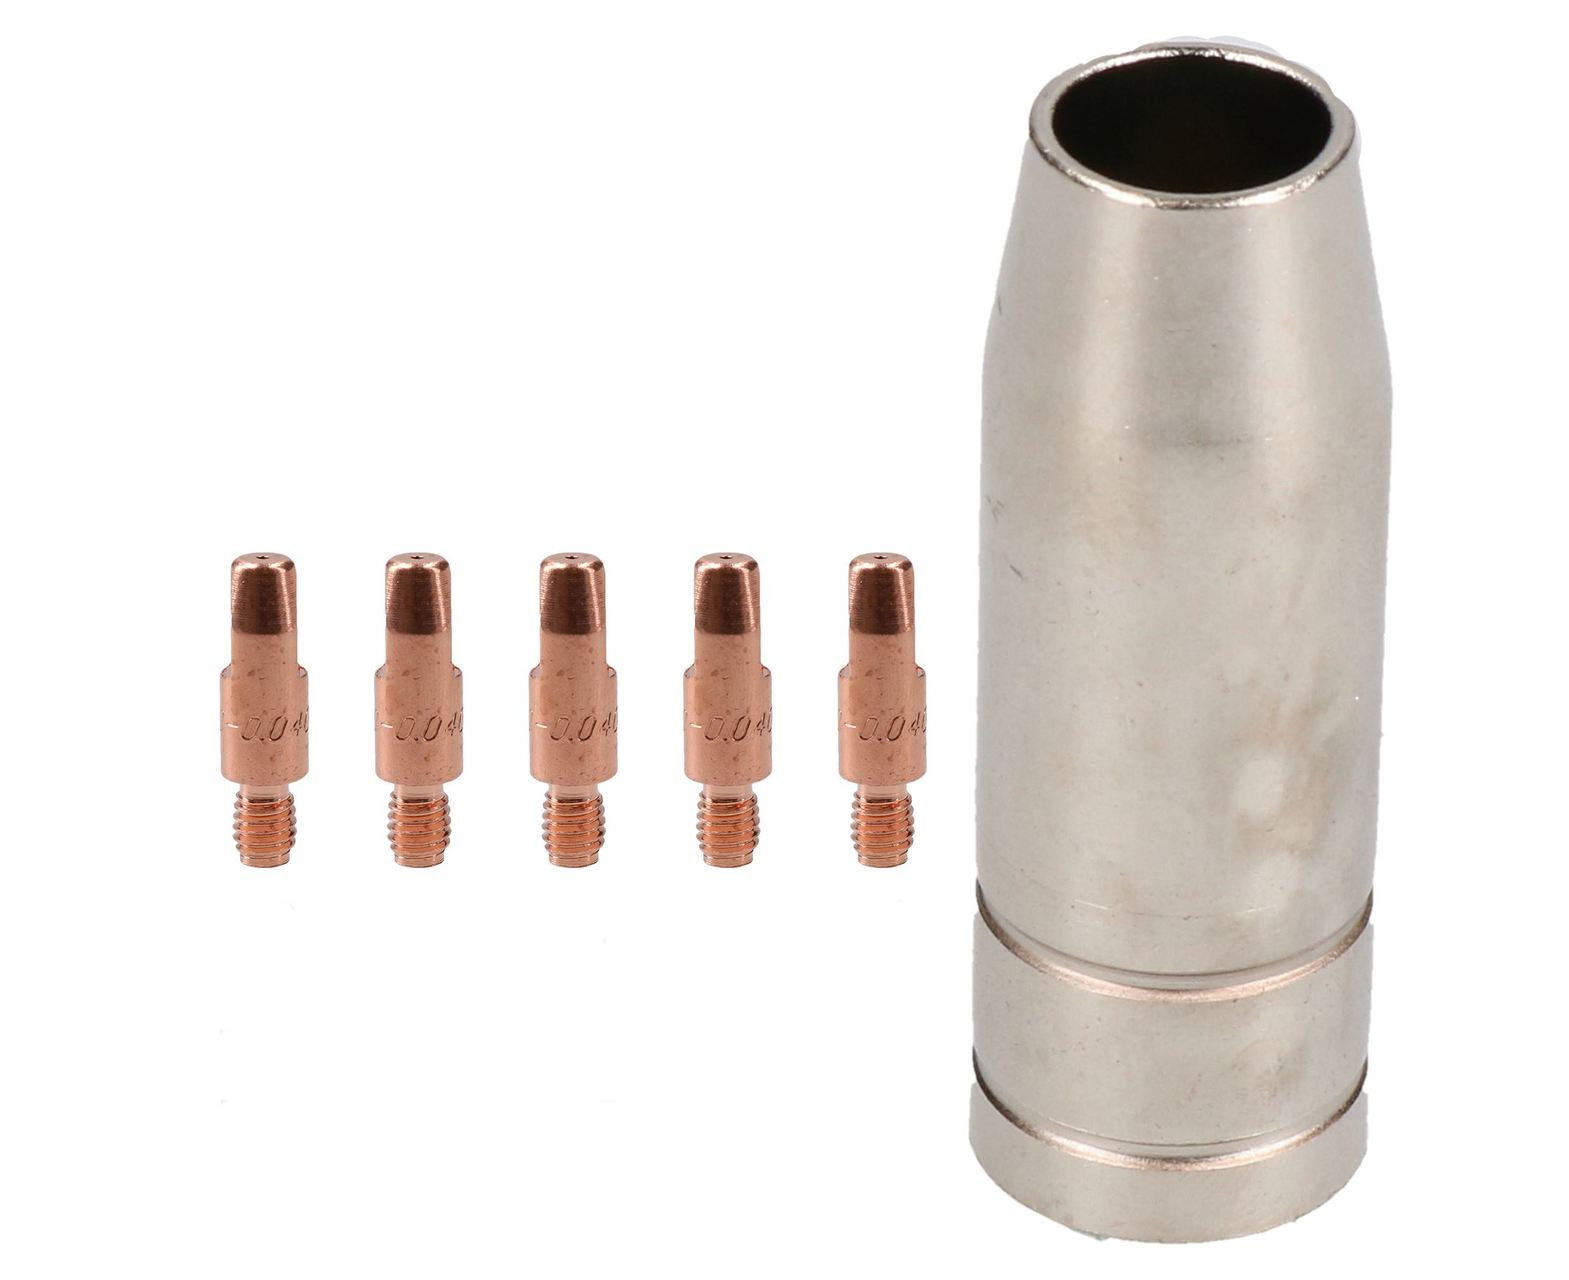 0.6mm Mig Welding Welder Round Contact Tips for MB25 MB36 Euro Torches 5pk 